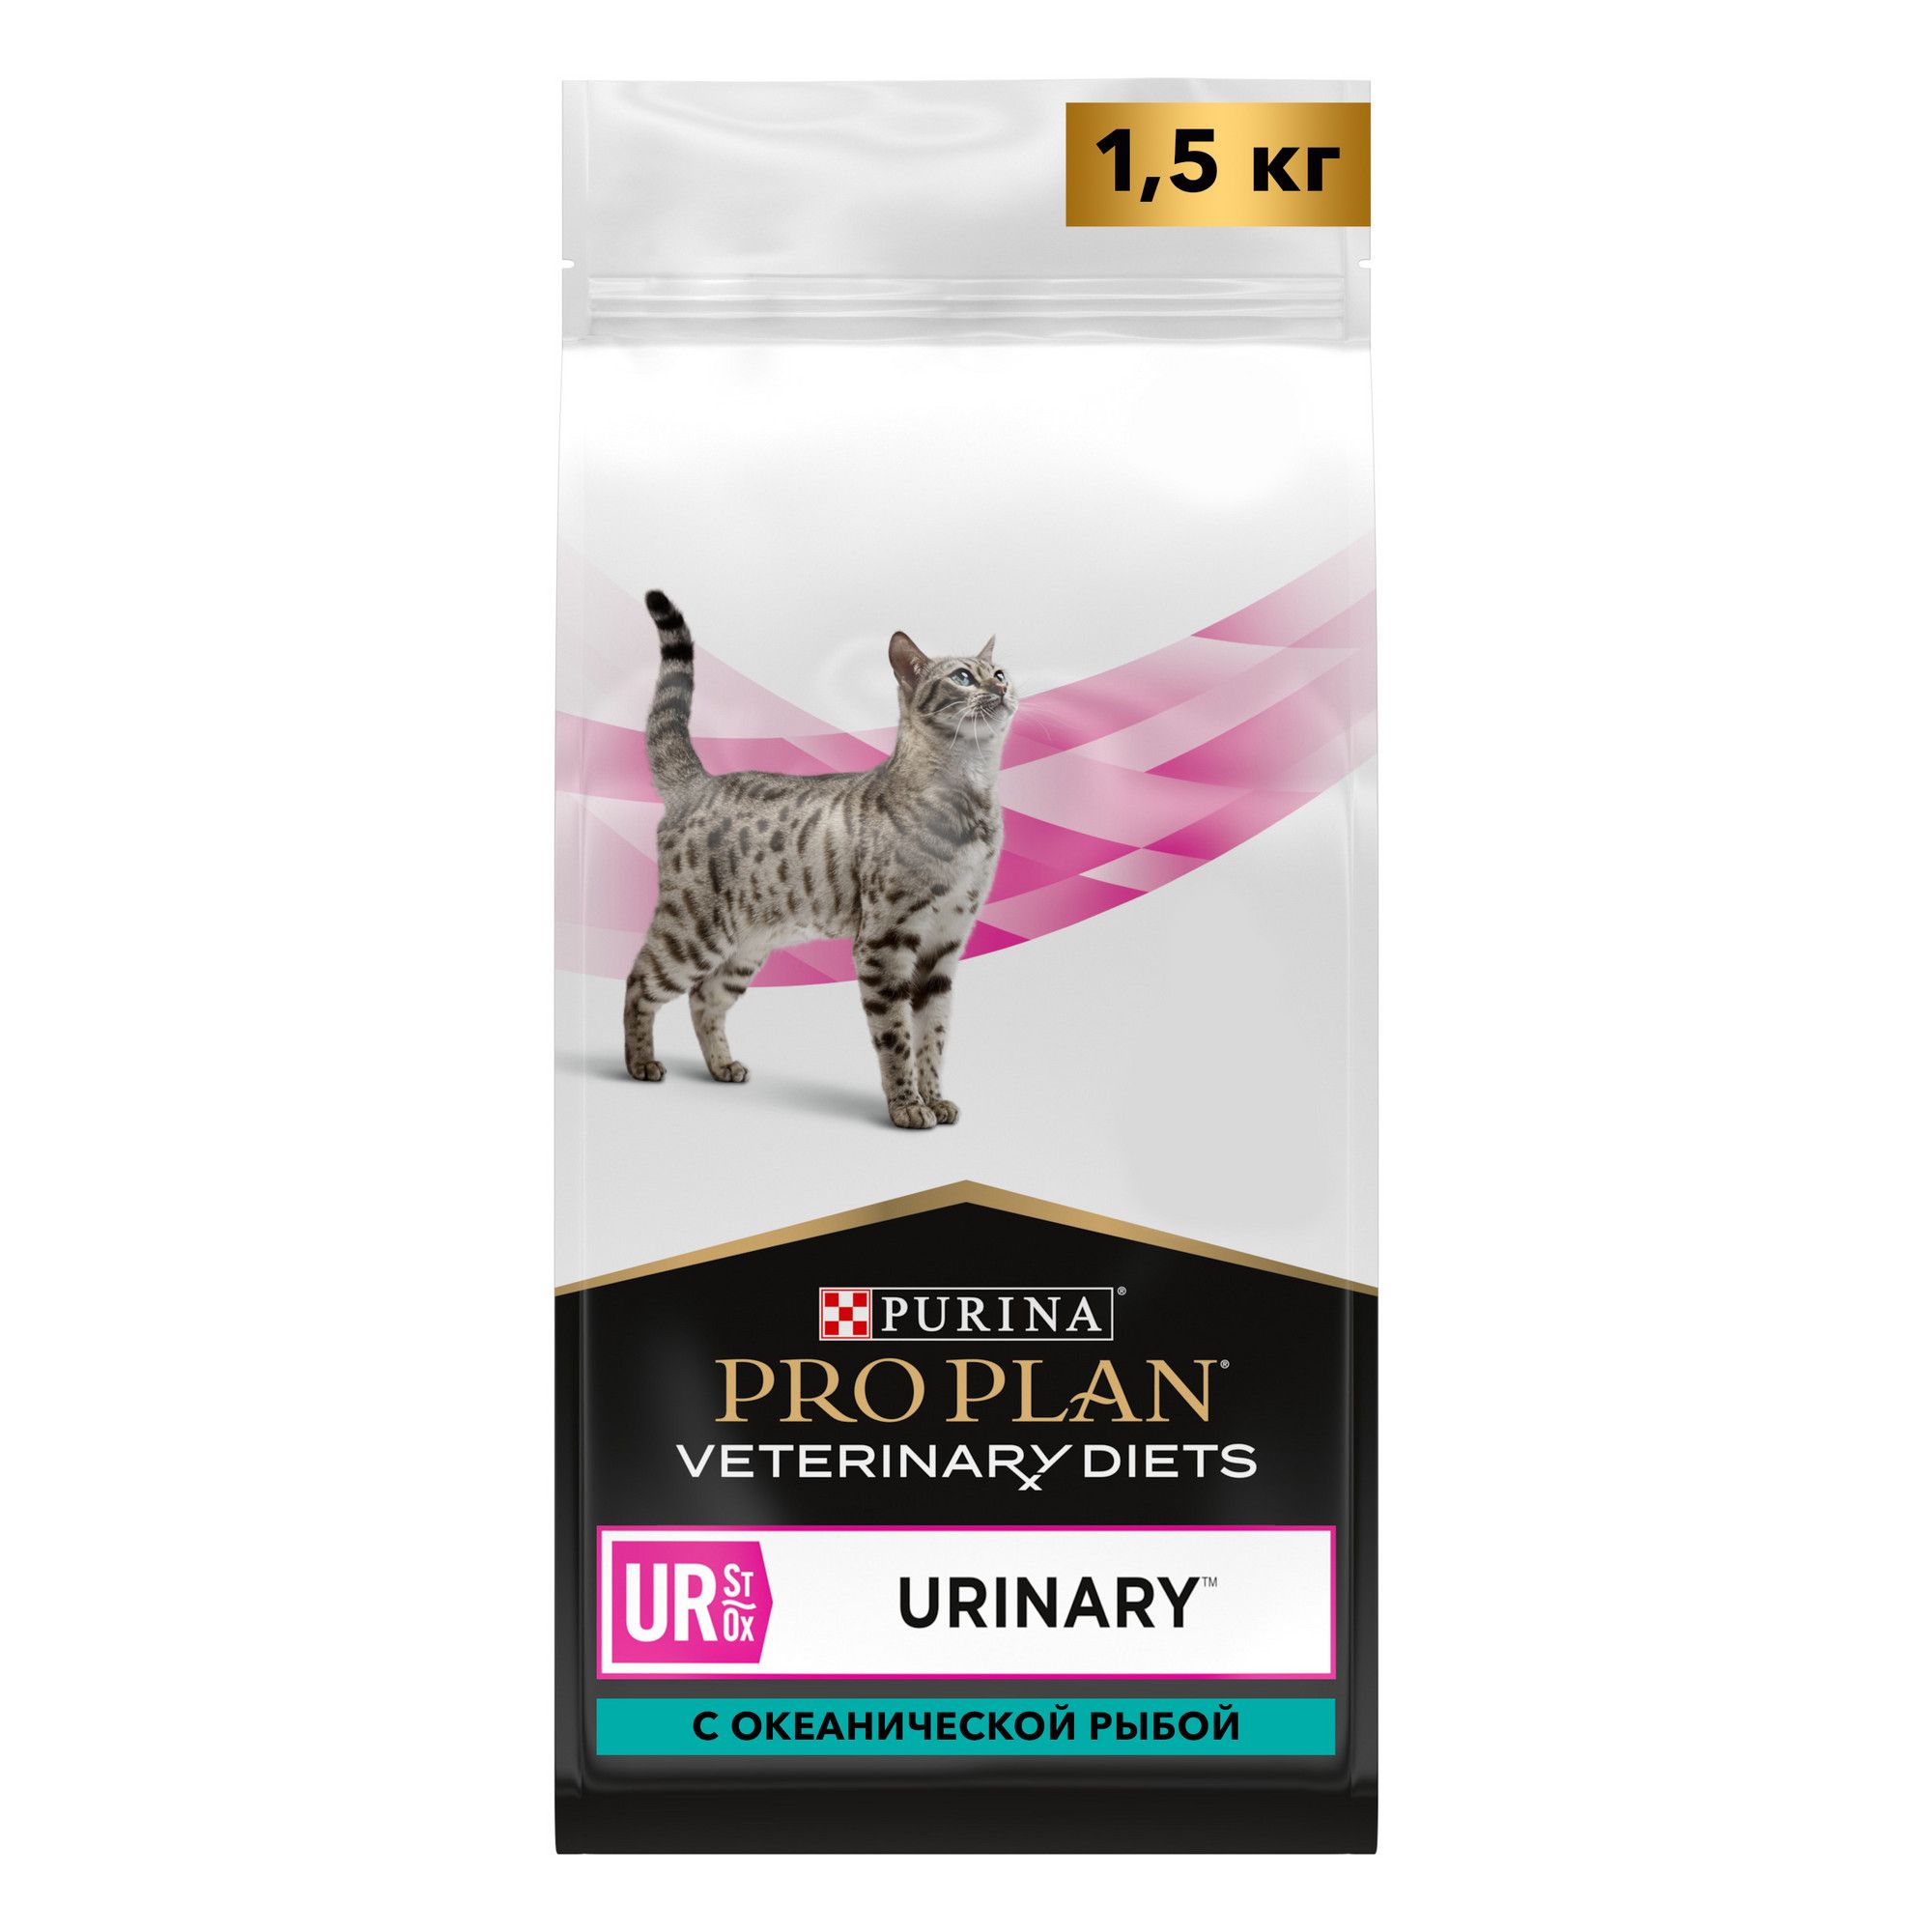 Pro plan veterinary diets urinary для кошек. Pro Plan® Veterinary Diets ur St/Ox Urinary. Pro Plan Urinary для кошек. Pro Plan Veterinary Diets DM Pouches туц.